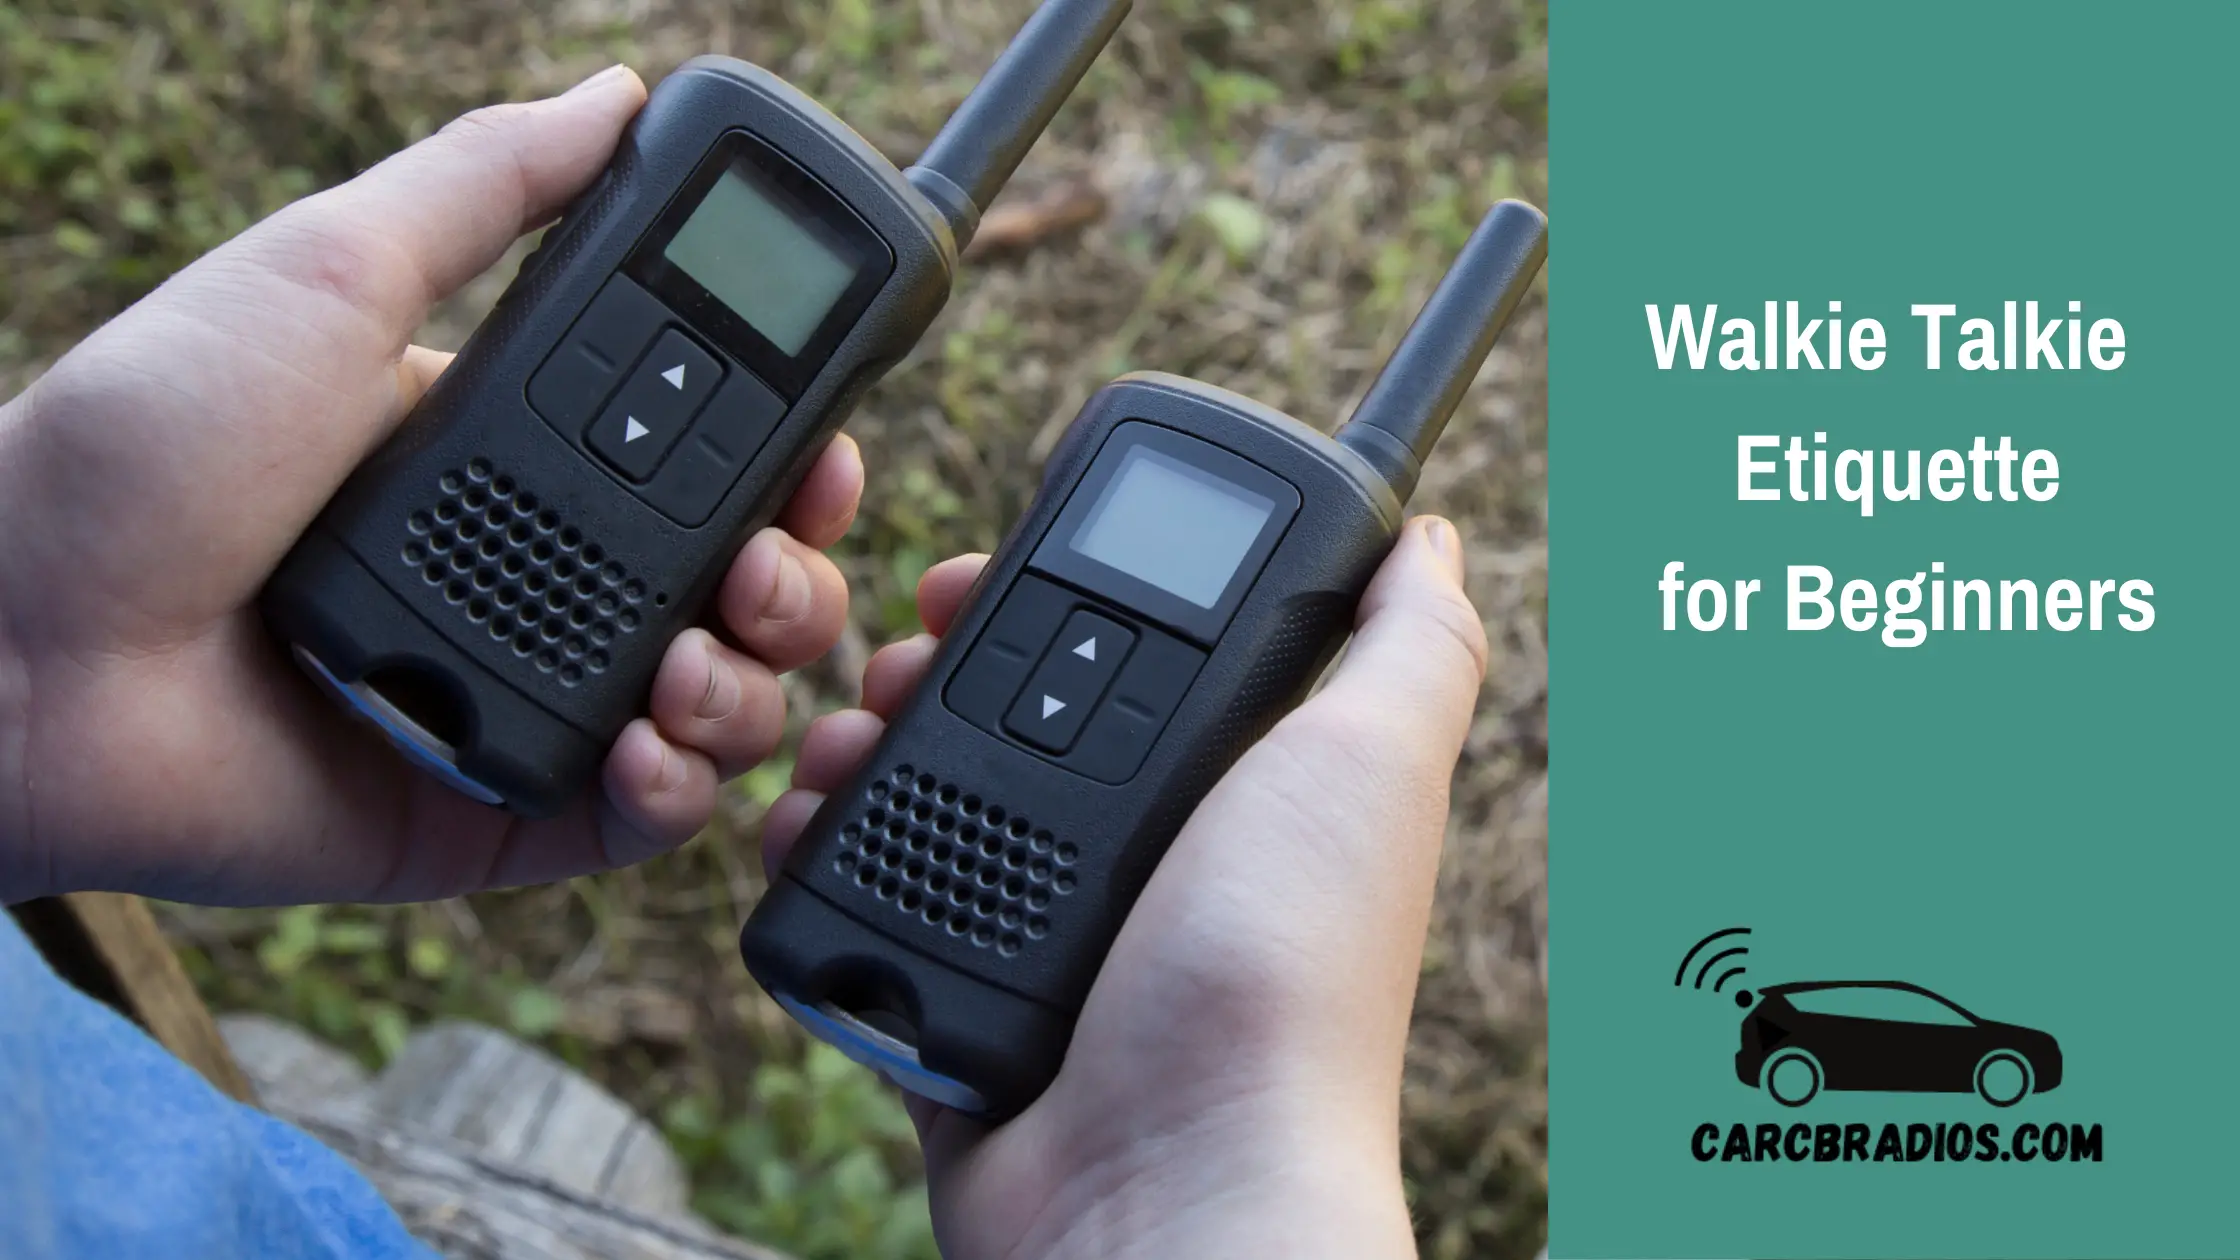 Walkie Talkie Etiquette for Beginners featured image